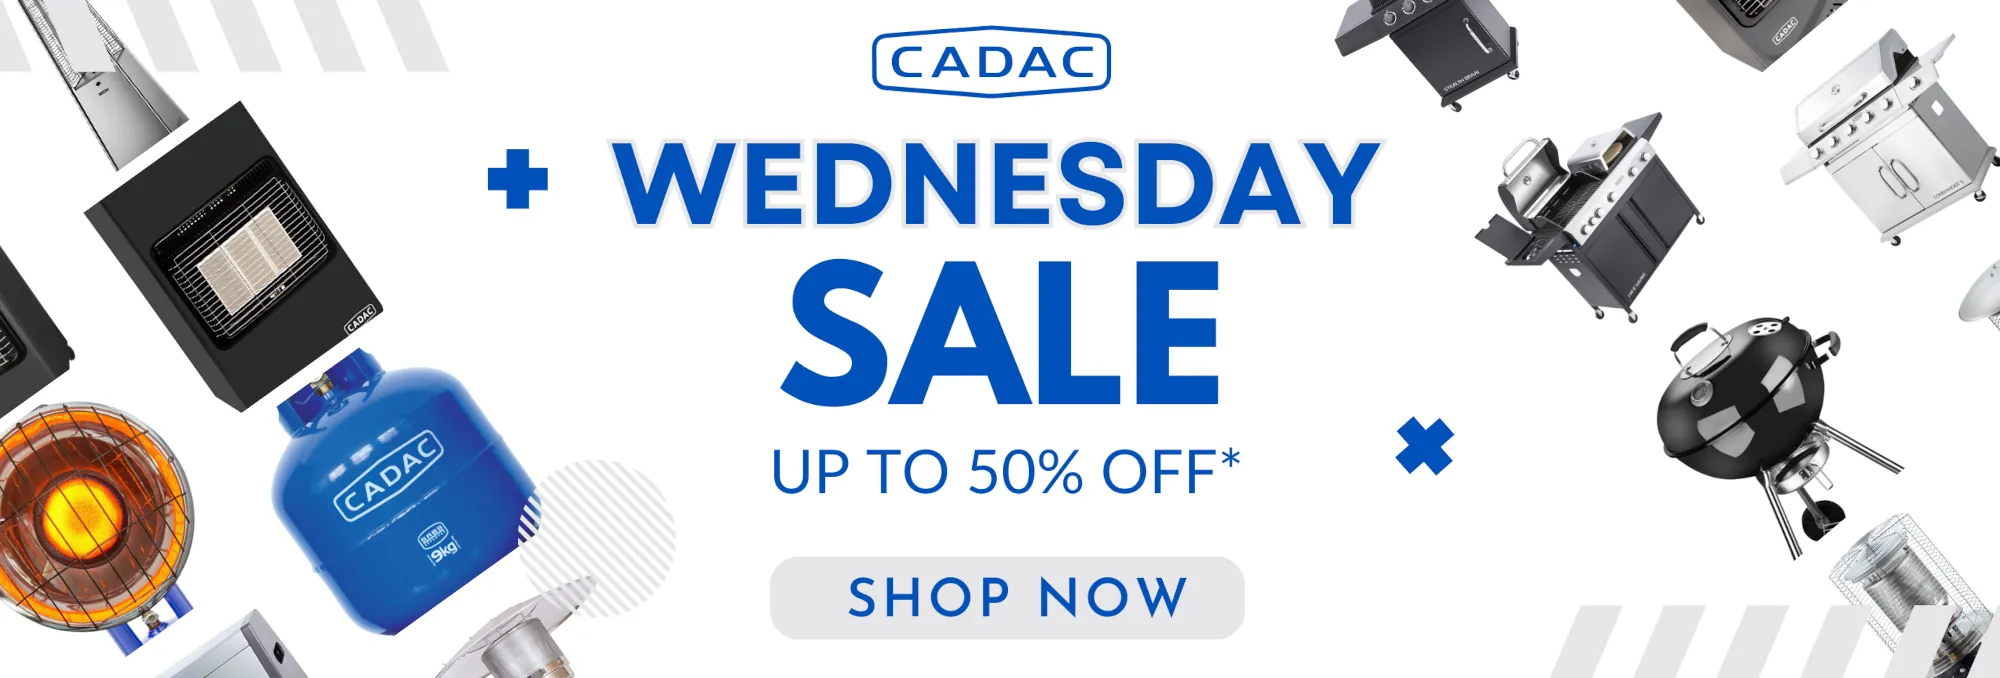 cadac wednesday products sale